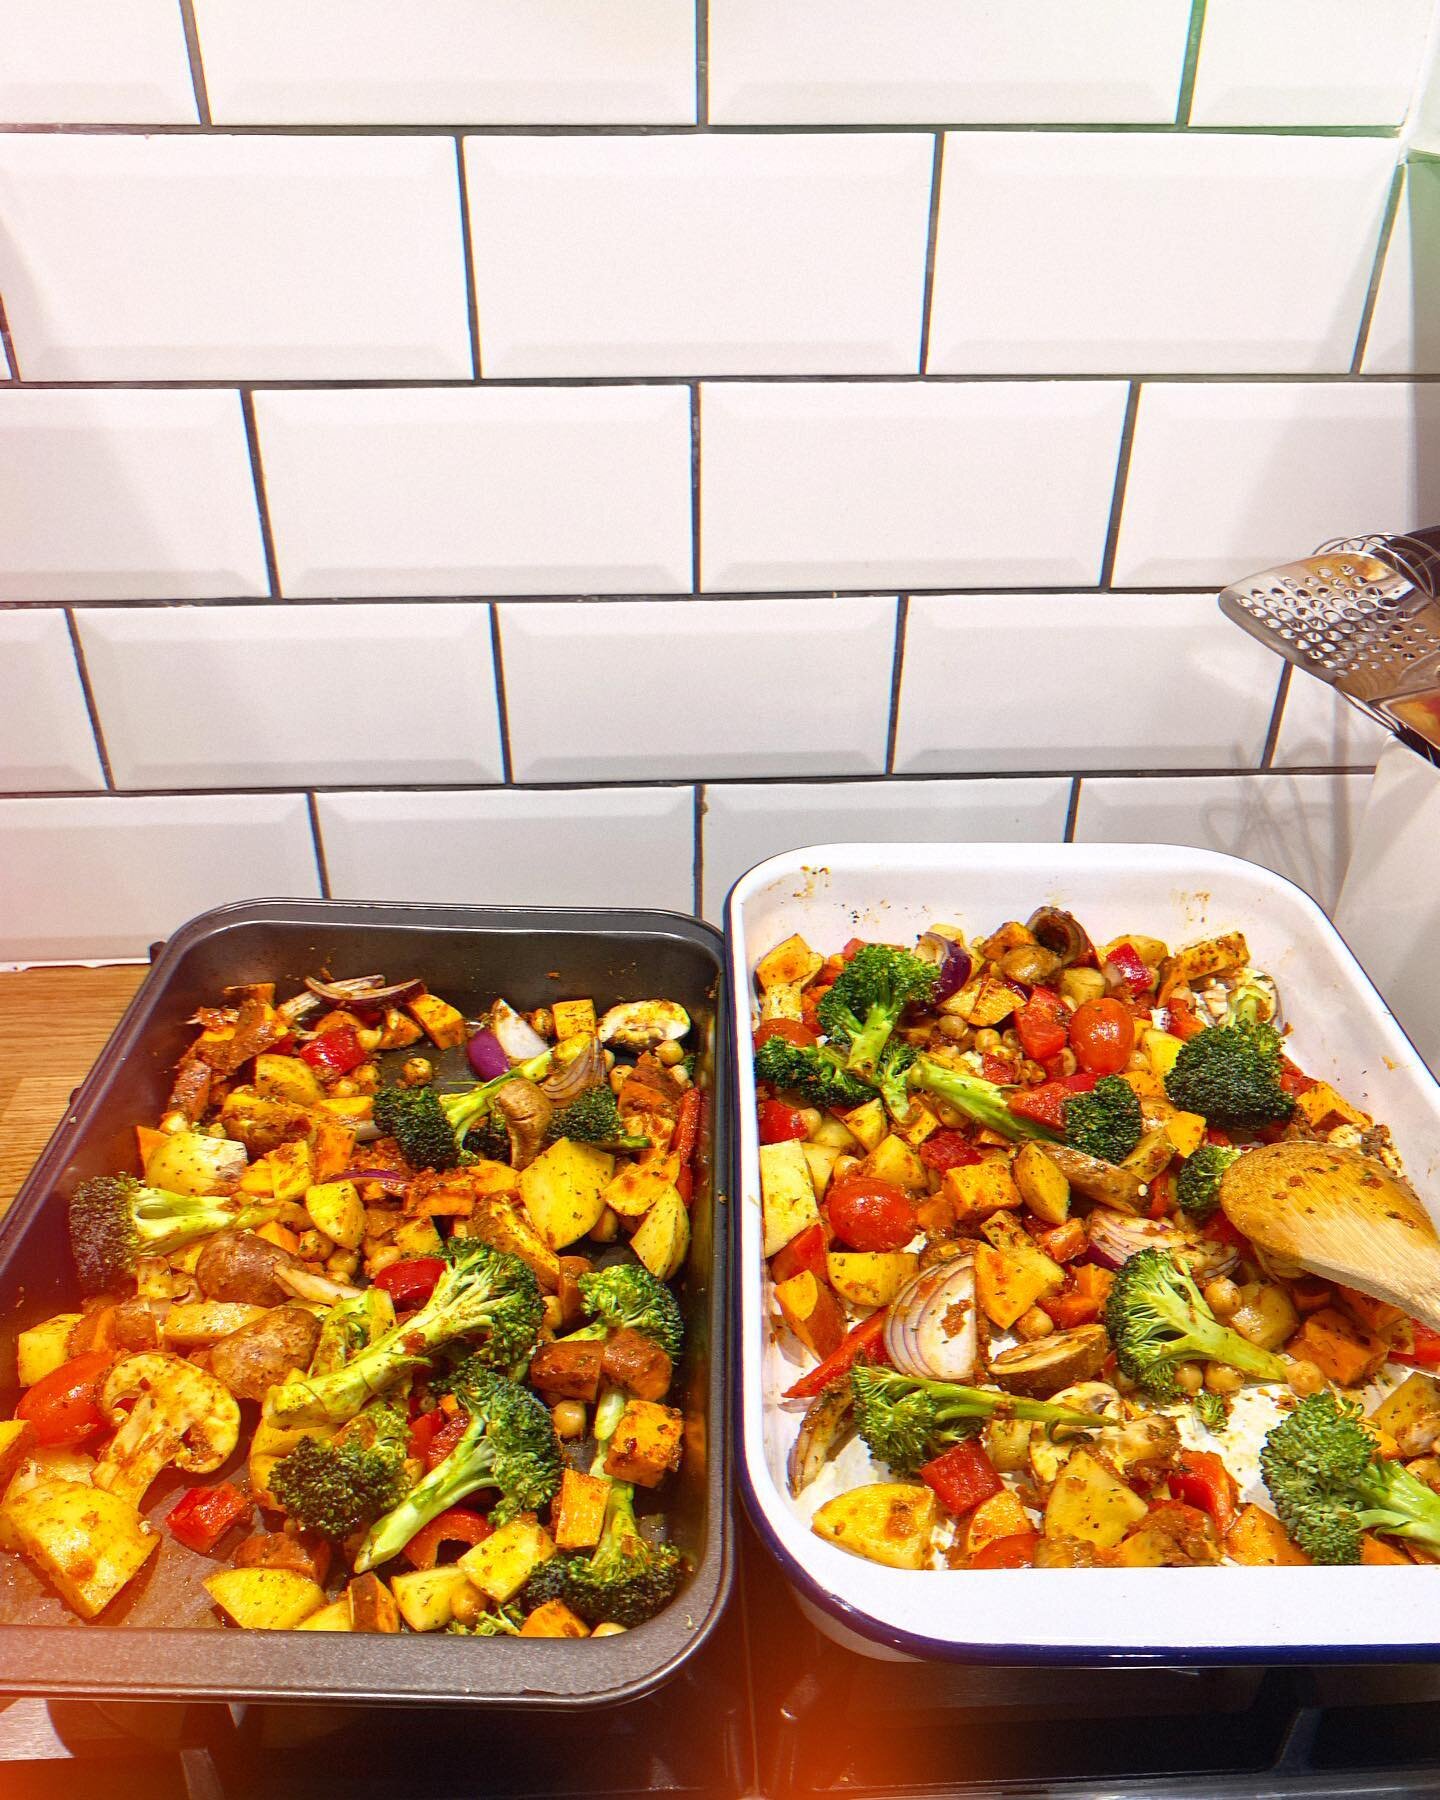 🌱What are 5 ways you can boost your vegetable intake? 

1. Vegetable traybake / roasting various vegetables you have in the fridge - Roasting vegetables is a great way to use up whatever you have left in the fridge instead of having to throw veg awa